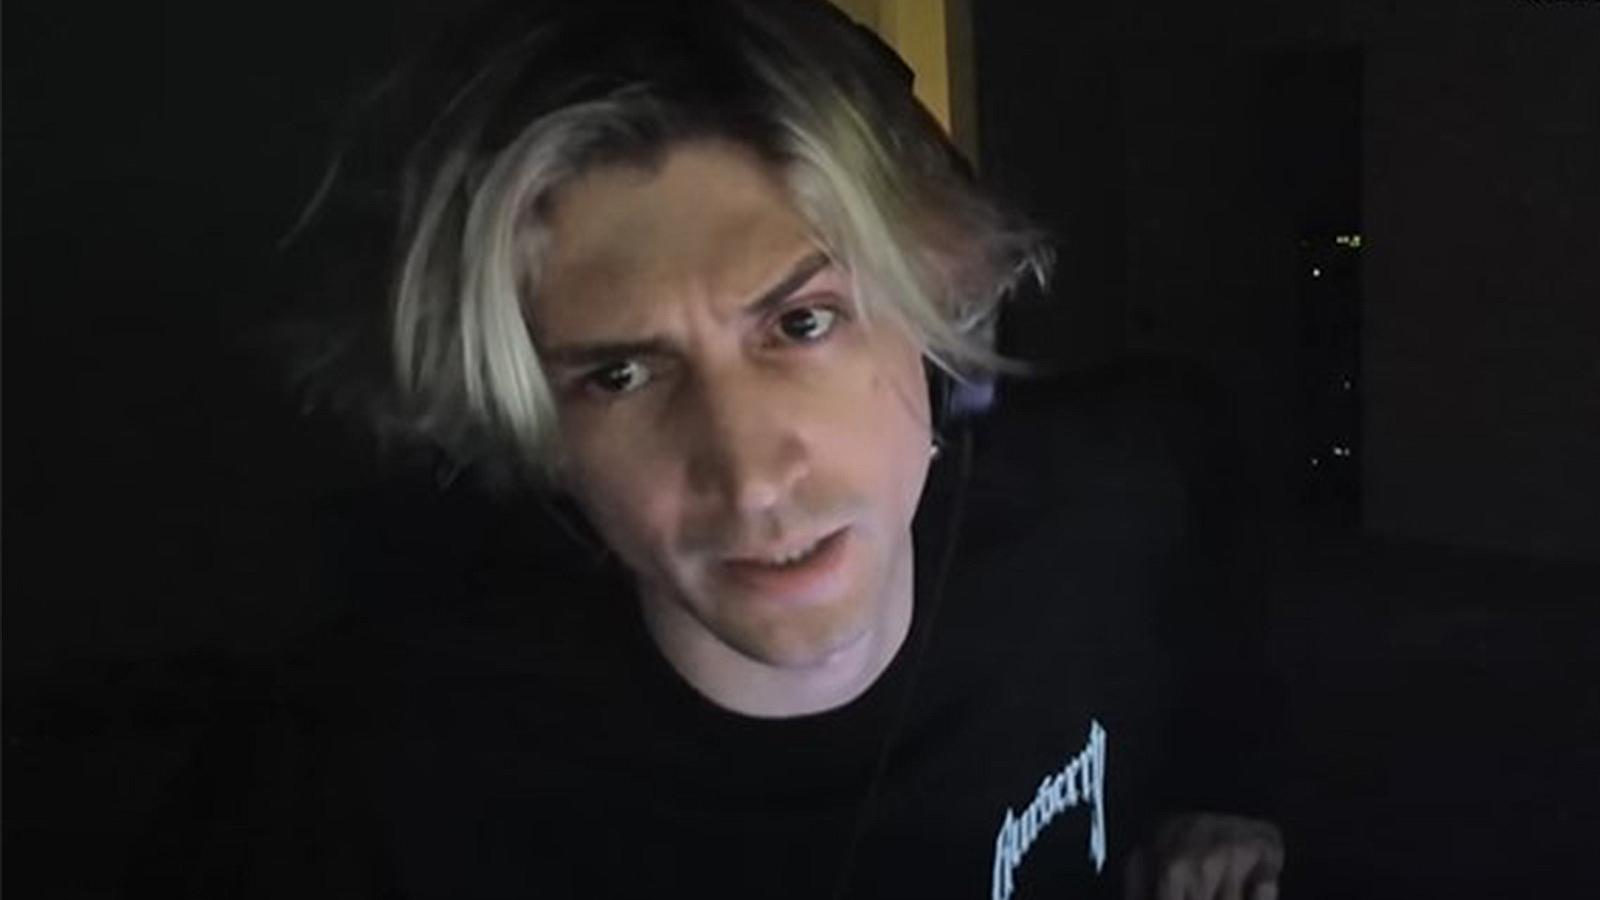 xqc-permaban-viewers-irl-streams